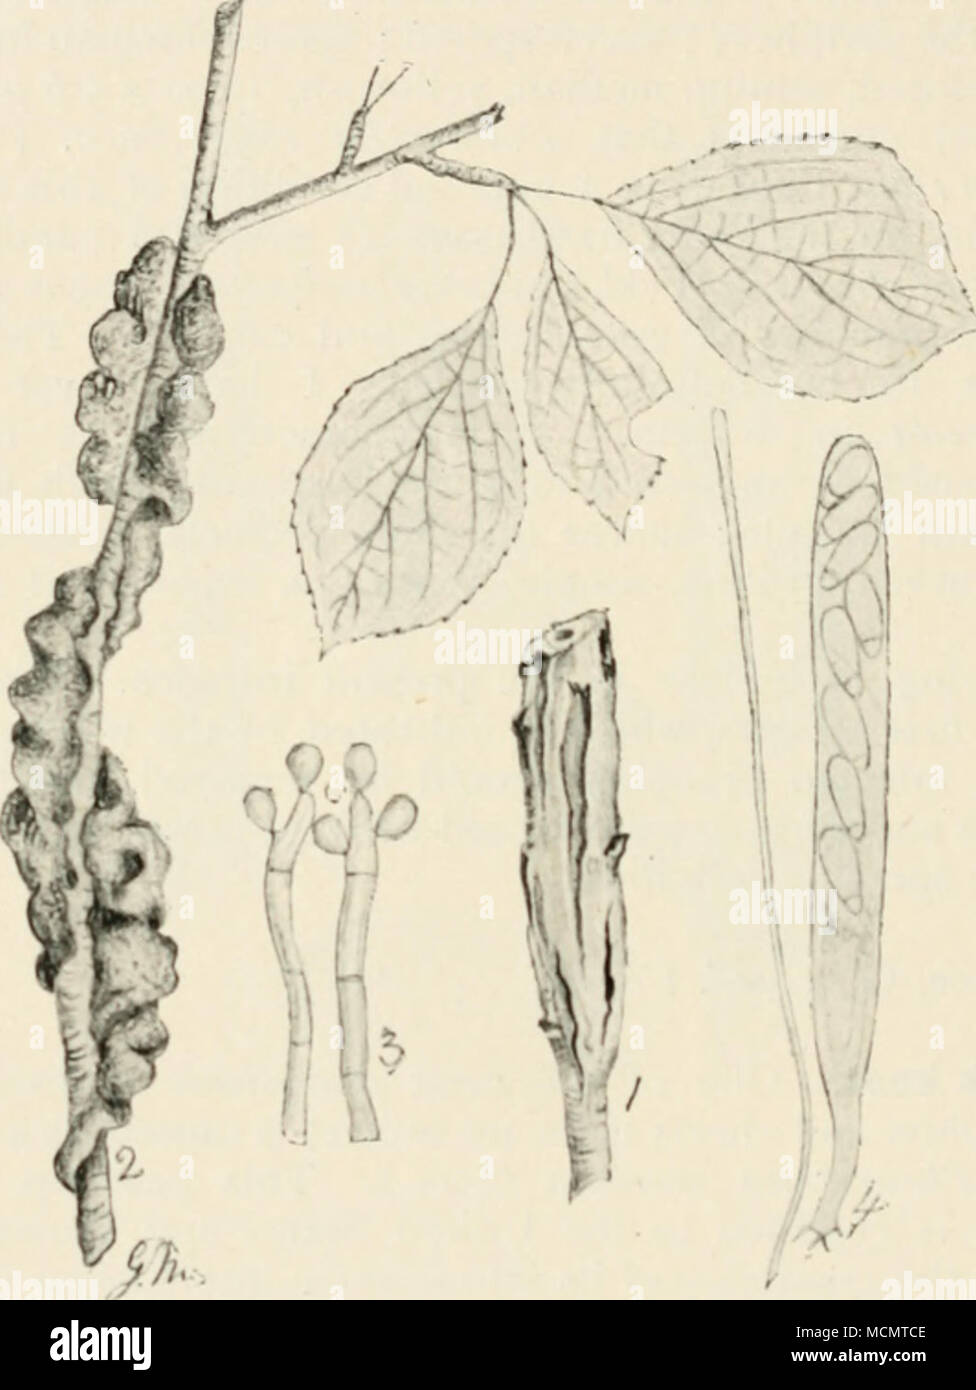 . Fig. 61.—Plowrightia mcrhosa. i, portion of a plum branch, showing conidial stage of the fungus; 2, branch with ascigerous condition of the fungus ; 3, conidiophores bearing conidia ; 4, ascus containing 8 spores. Figs, i and 2 rethiced ; rest highly mag. obvate, hyaline, i-septate, basal cell much the smaller of the two, 15-20 X 8-10 i. The only practical method of dealing with this disease is to cut out all diseased knots. When the tree is badly infected, new knots frequently develop at or near the points from which knots have been cut away. In such cases the Stock Photo